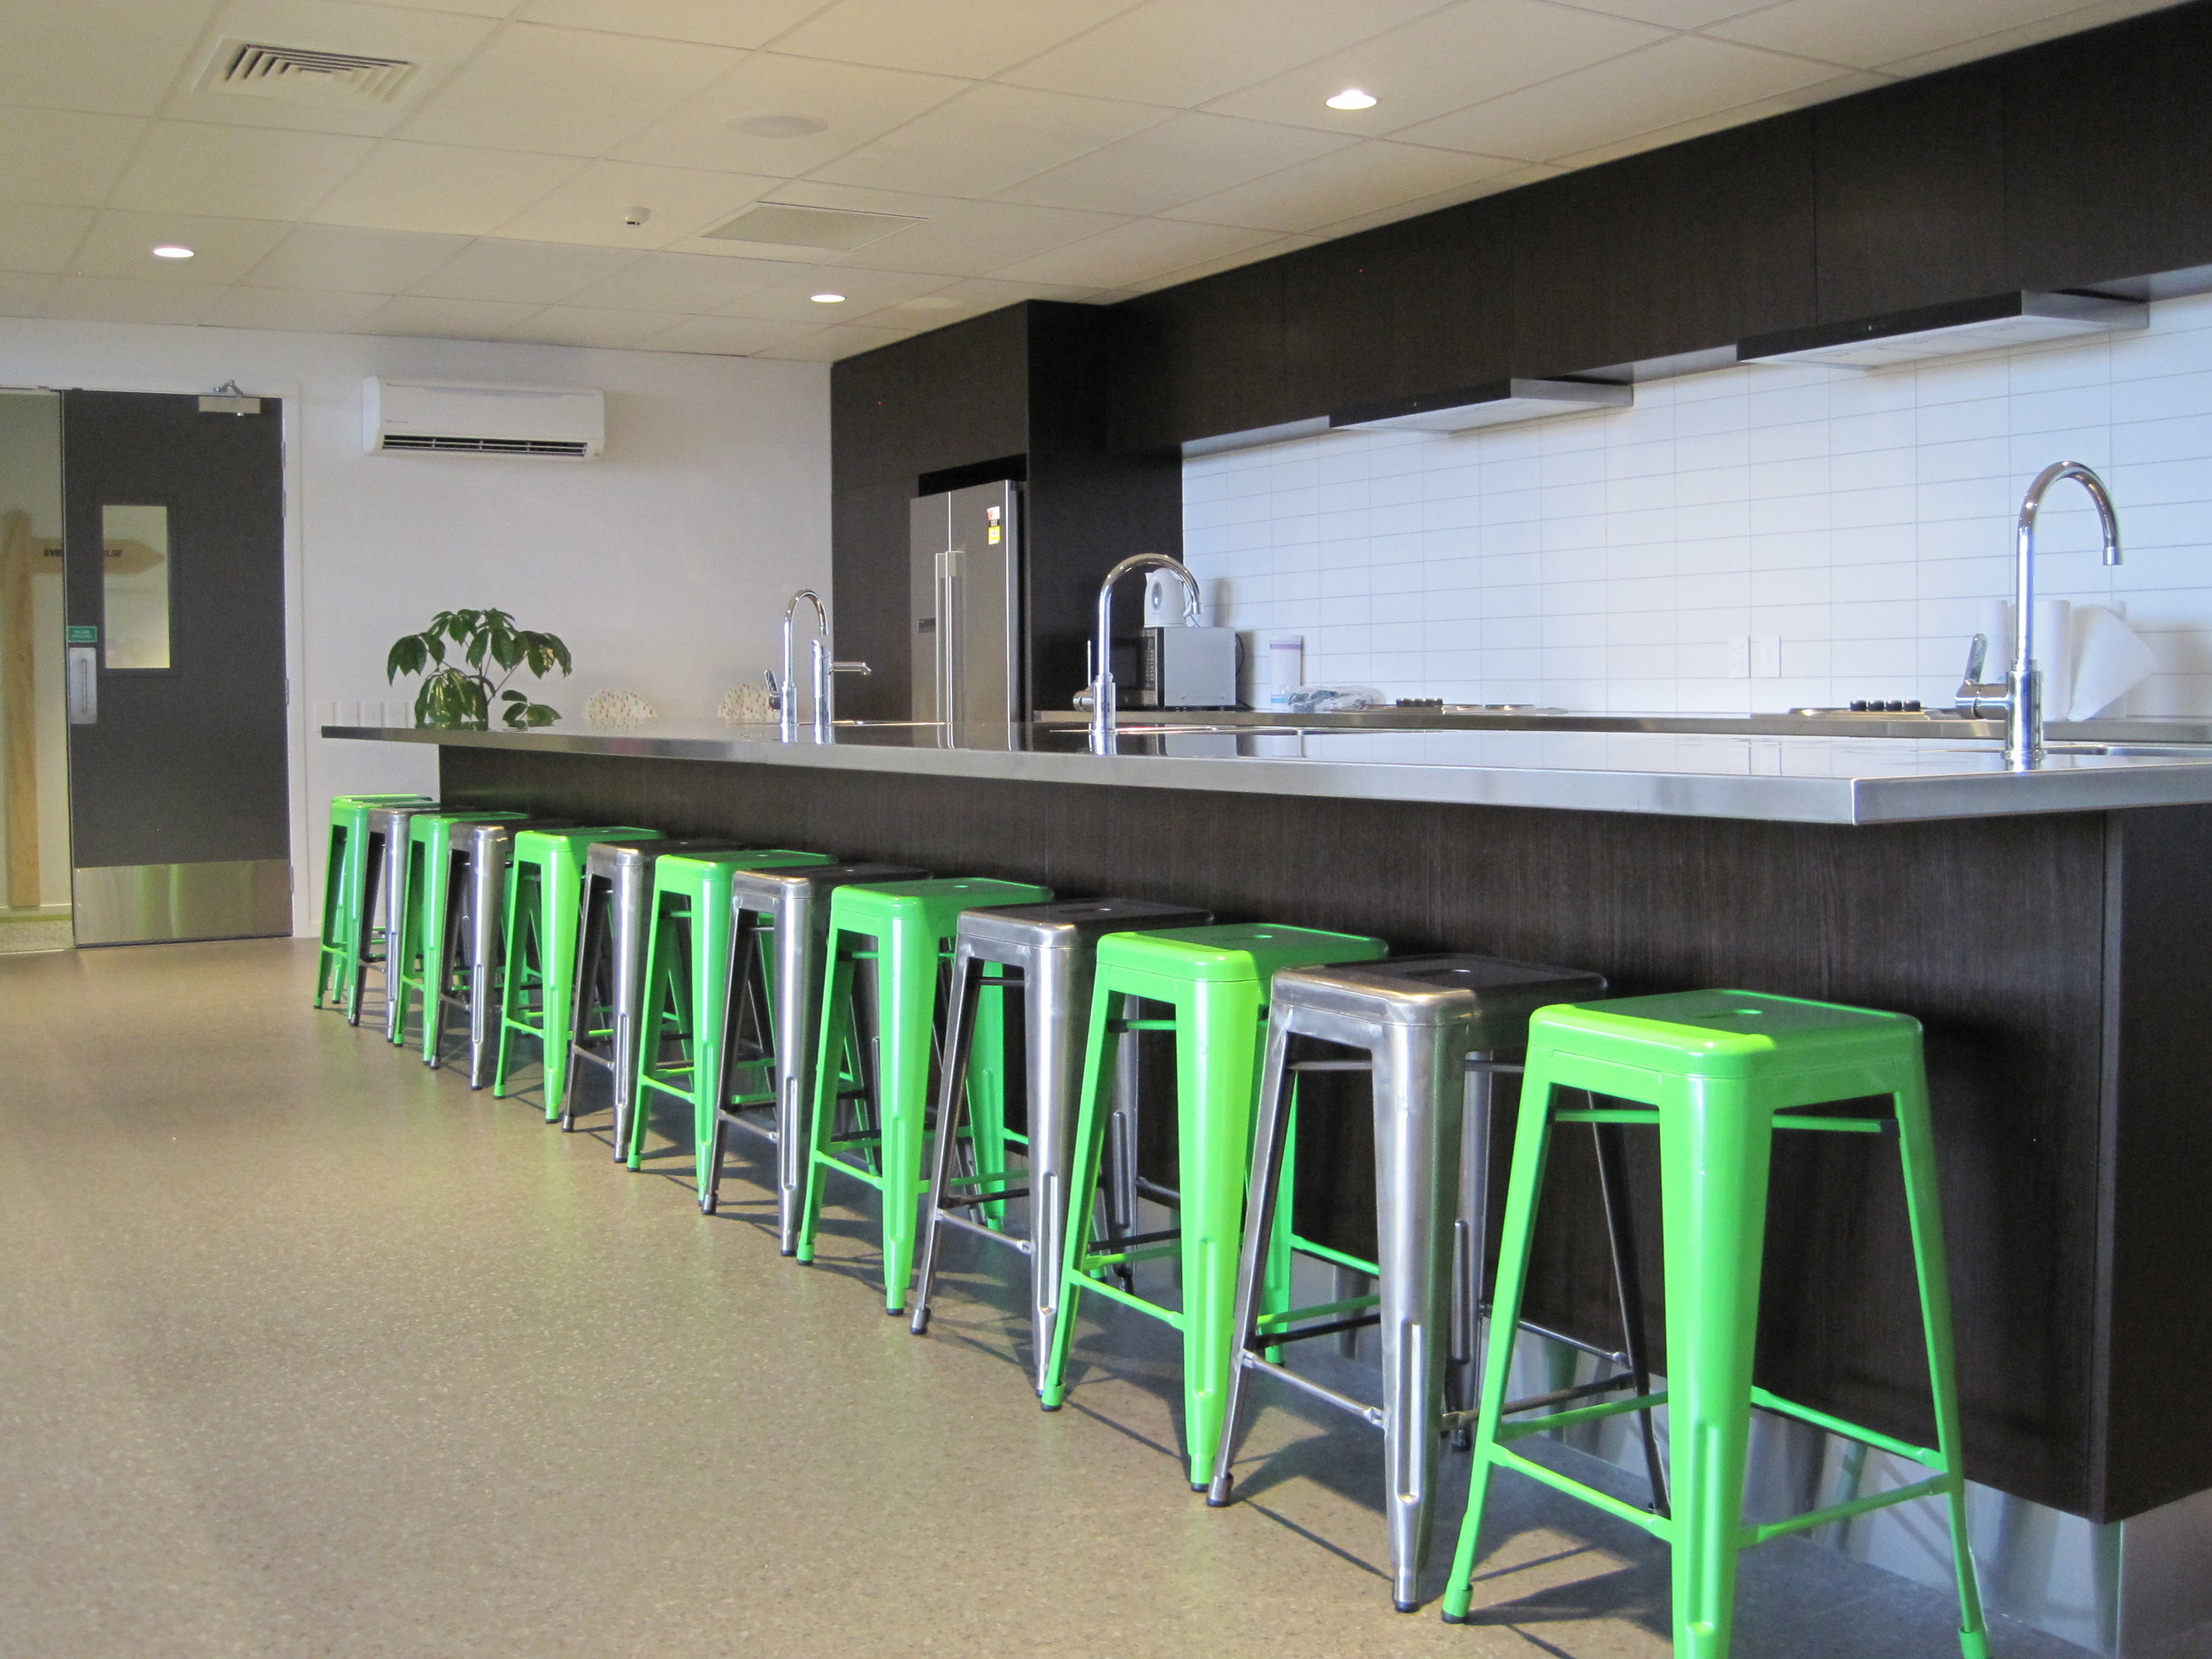 Jucy Snooze Christchurch Shared Kitchen Facilities